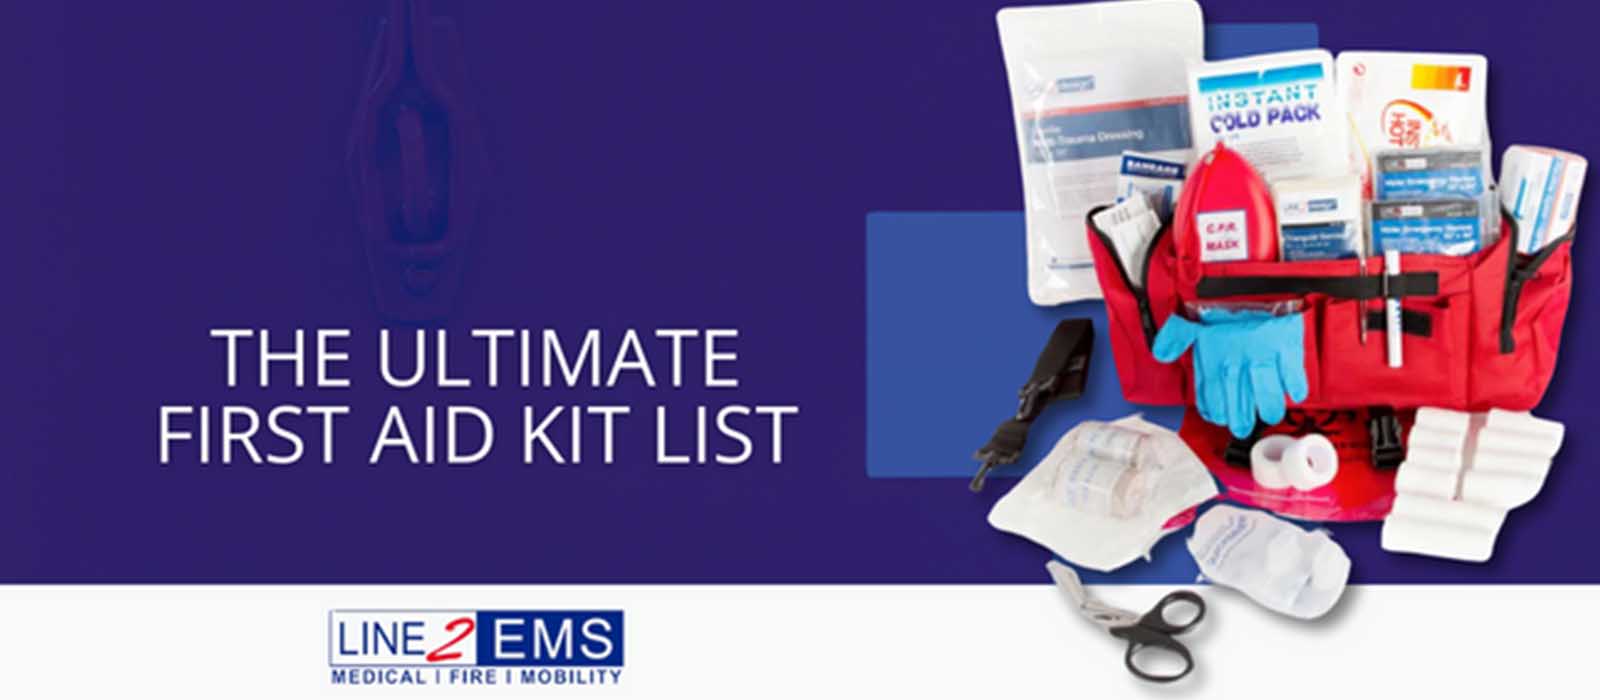 The Ultimate First Aid Kit List